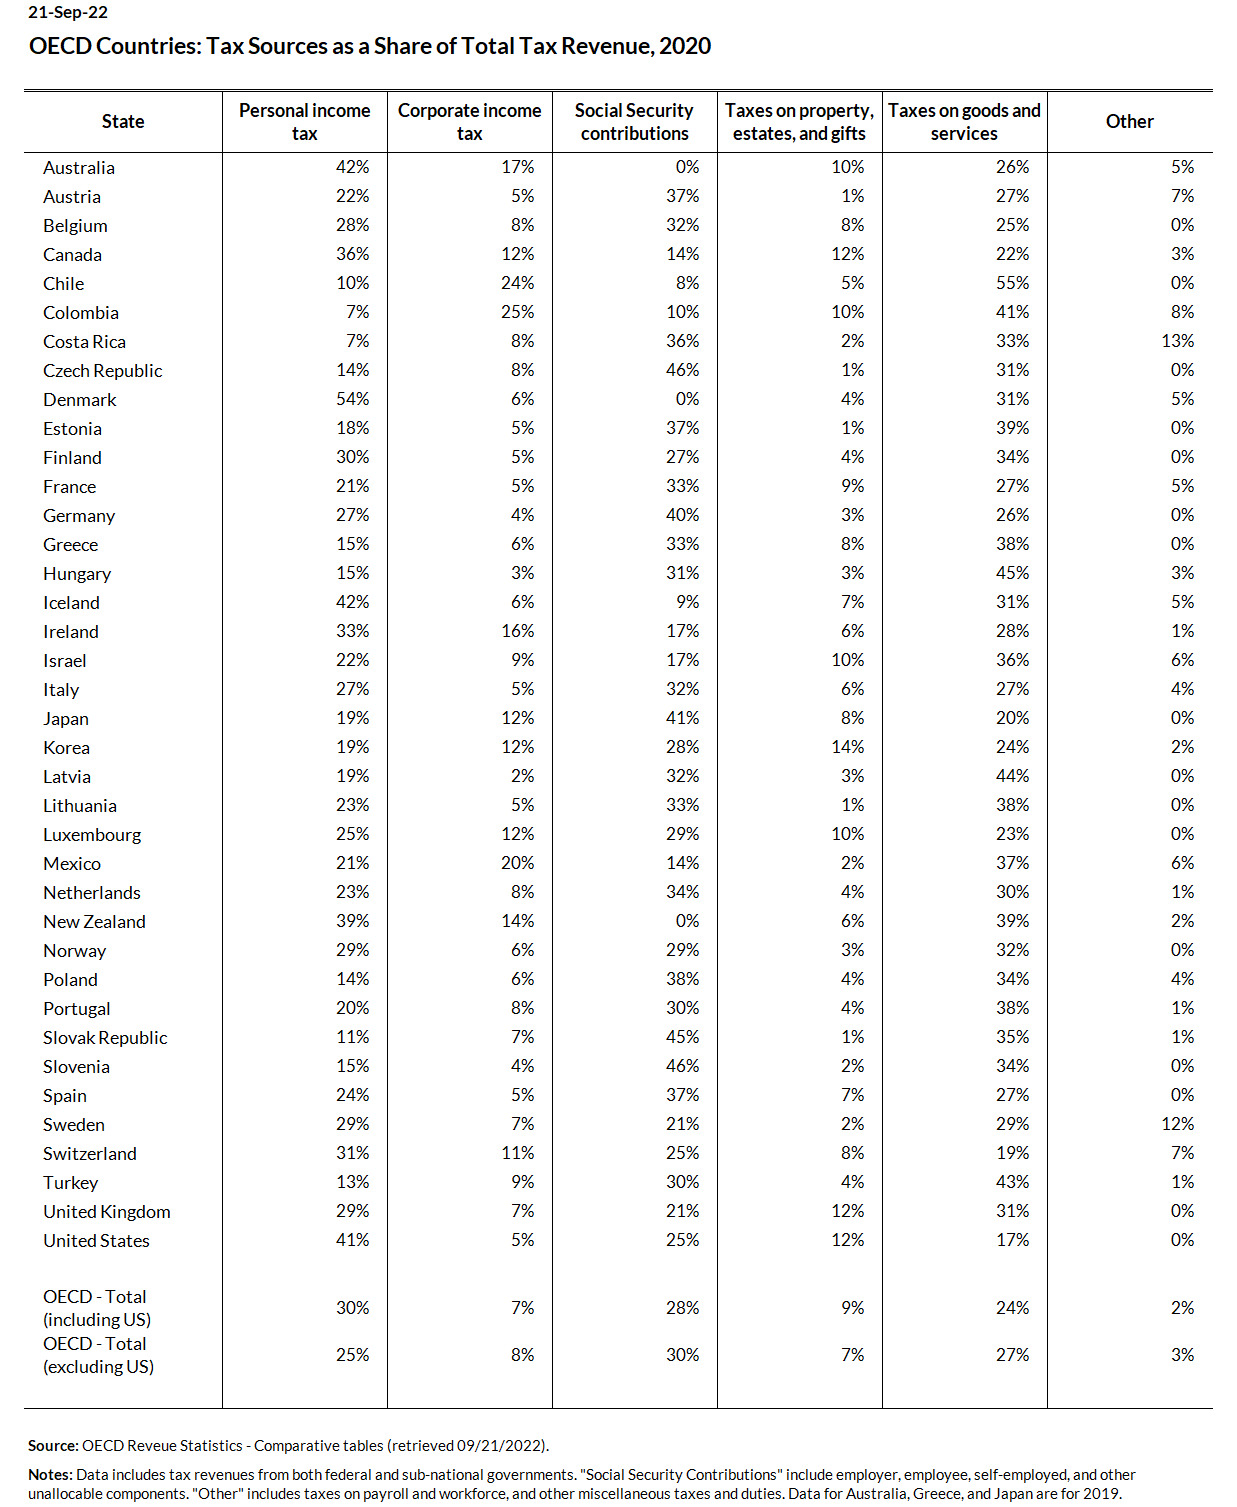 OECD Composition of Taxes